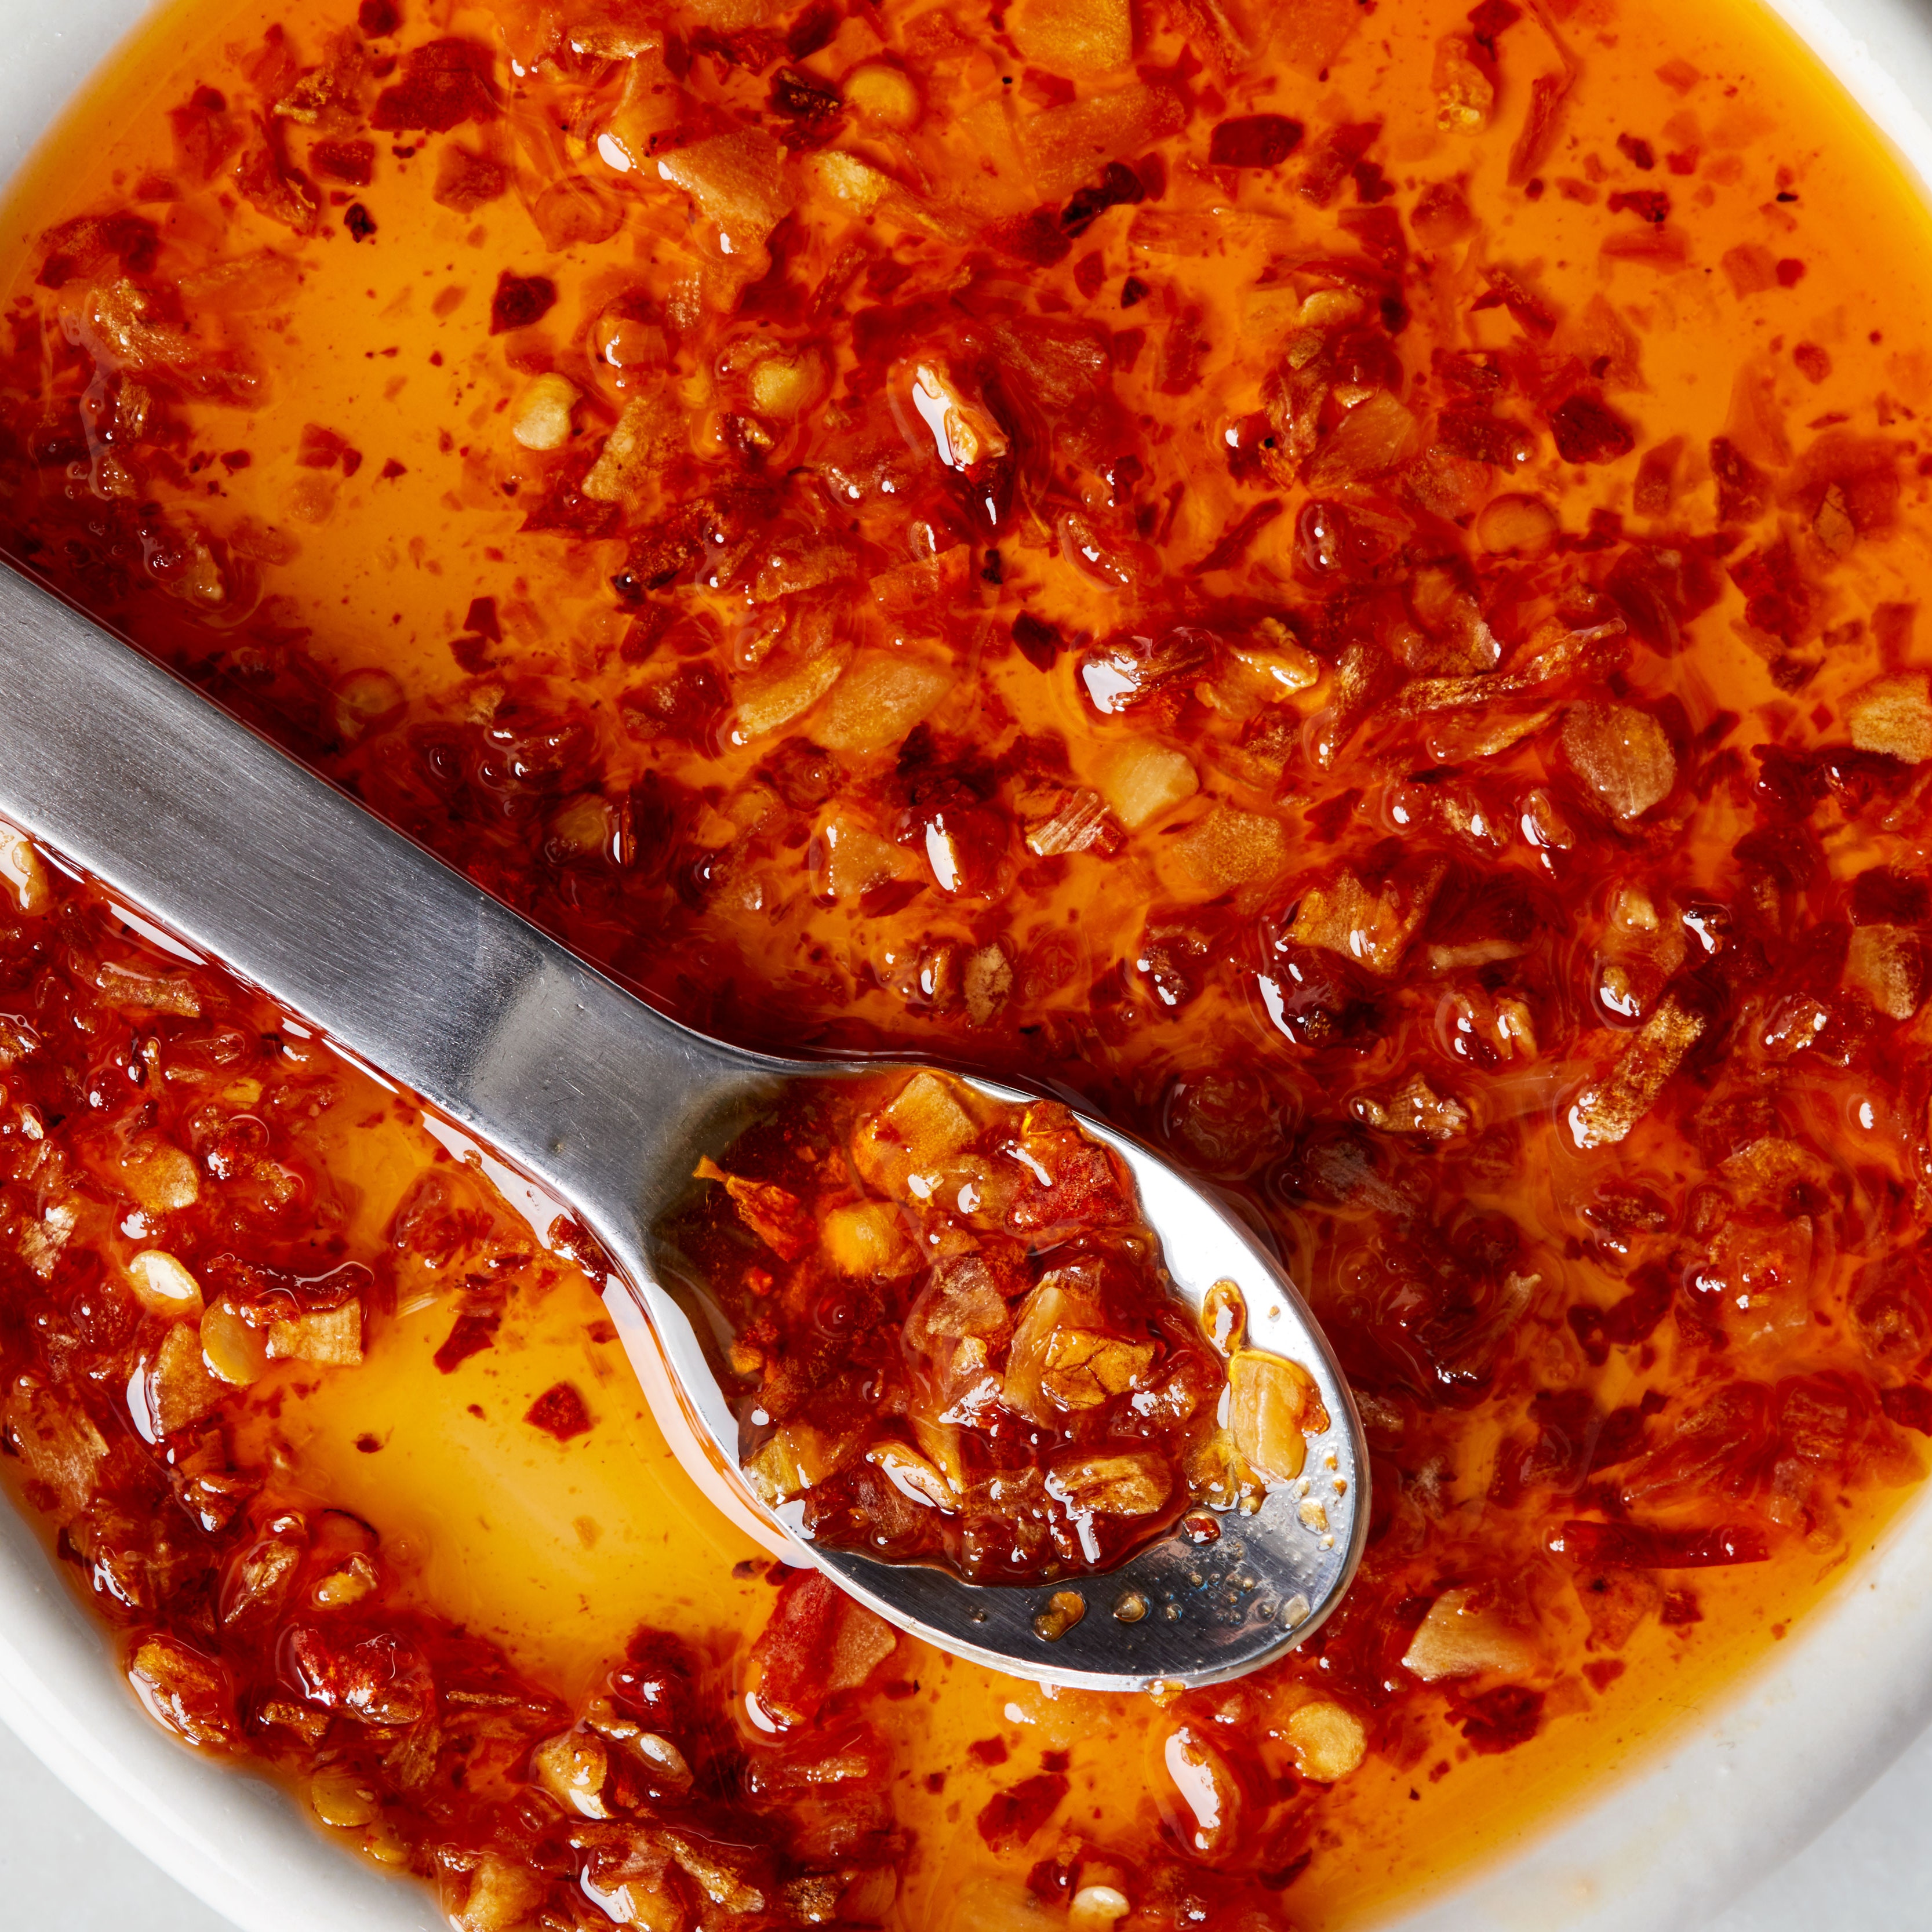 To Keep Your Chili Crisp Hot, Store It Cold